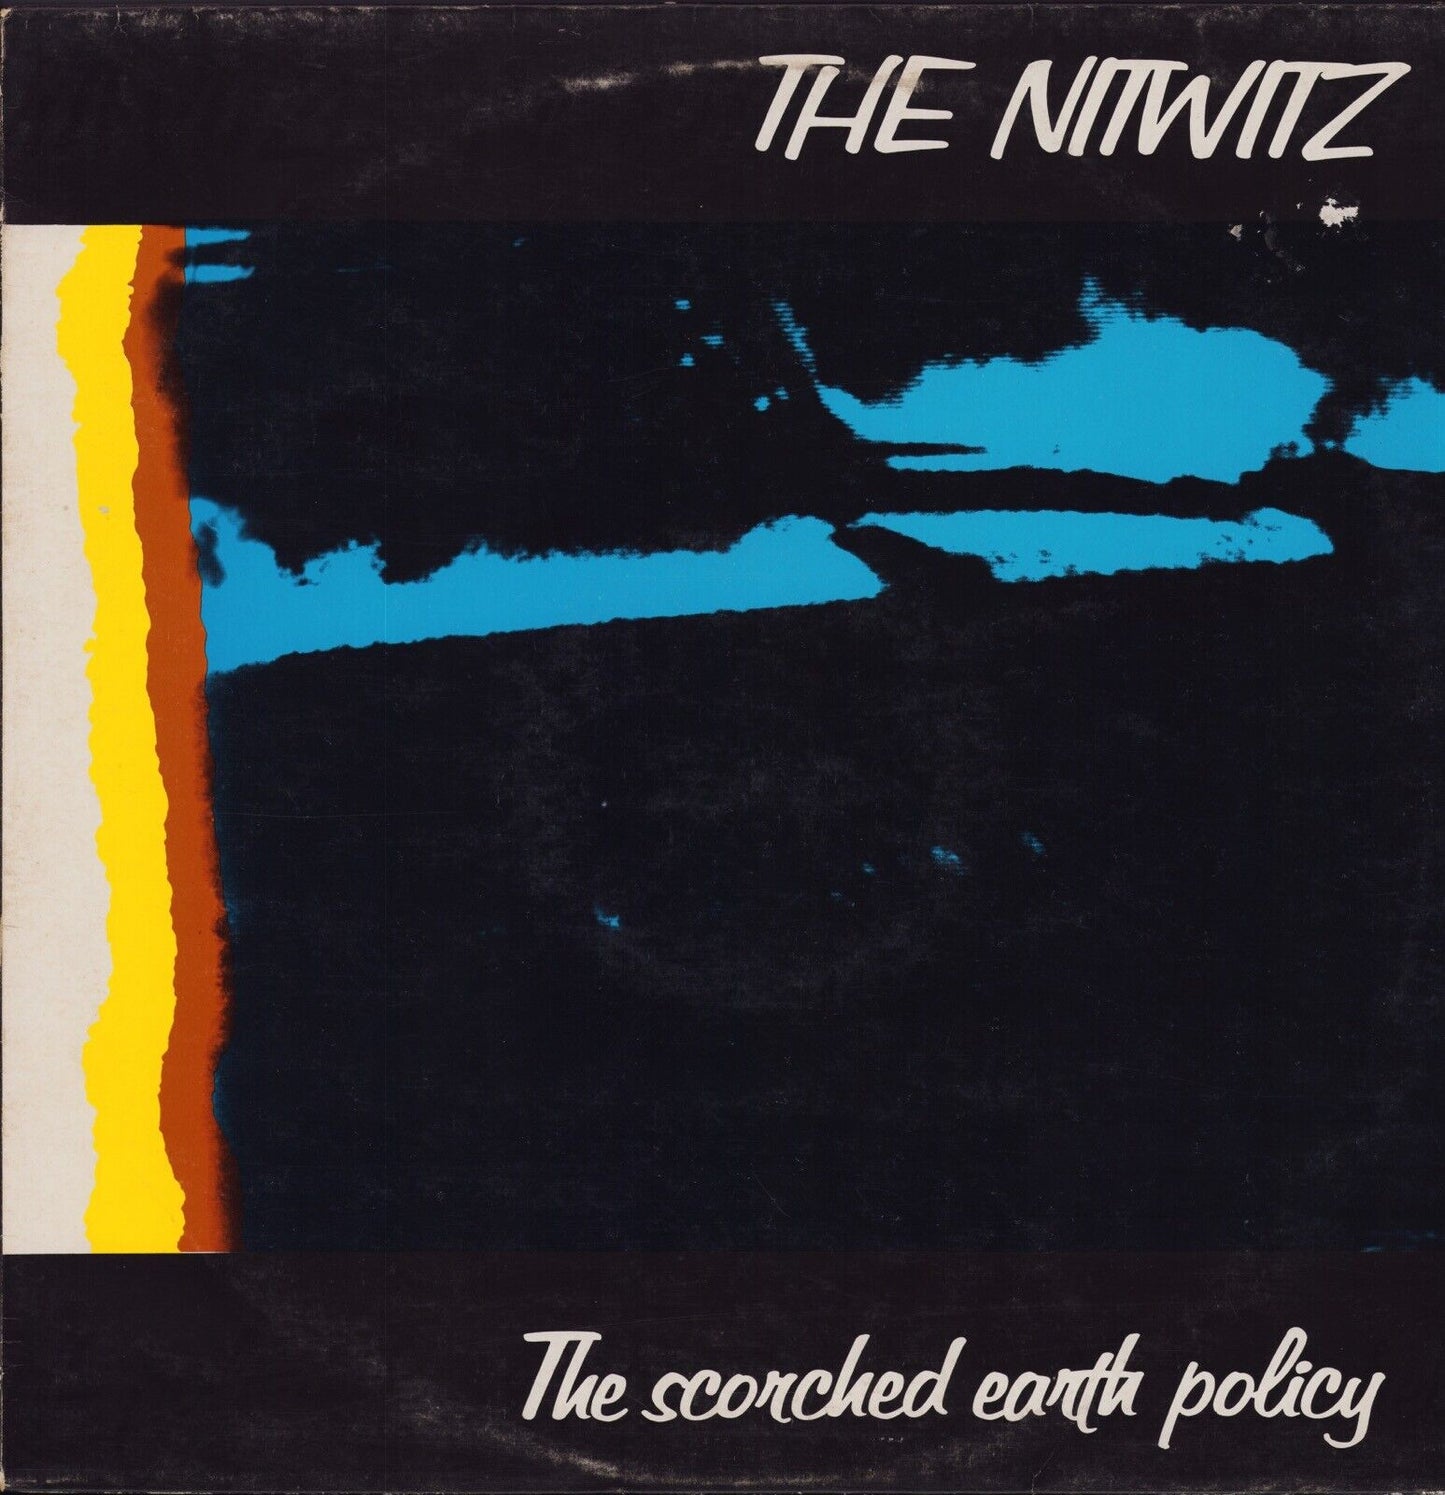 The Nitwitz - The Scorched Earth Policy Vinyl LP